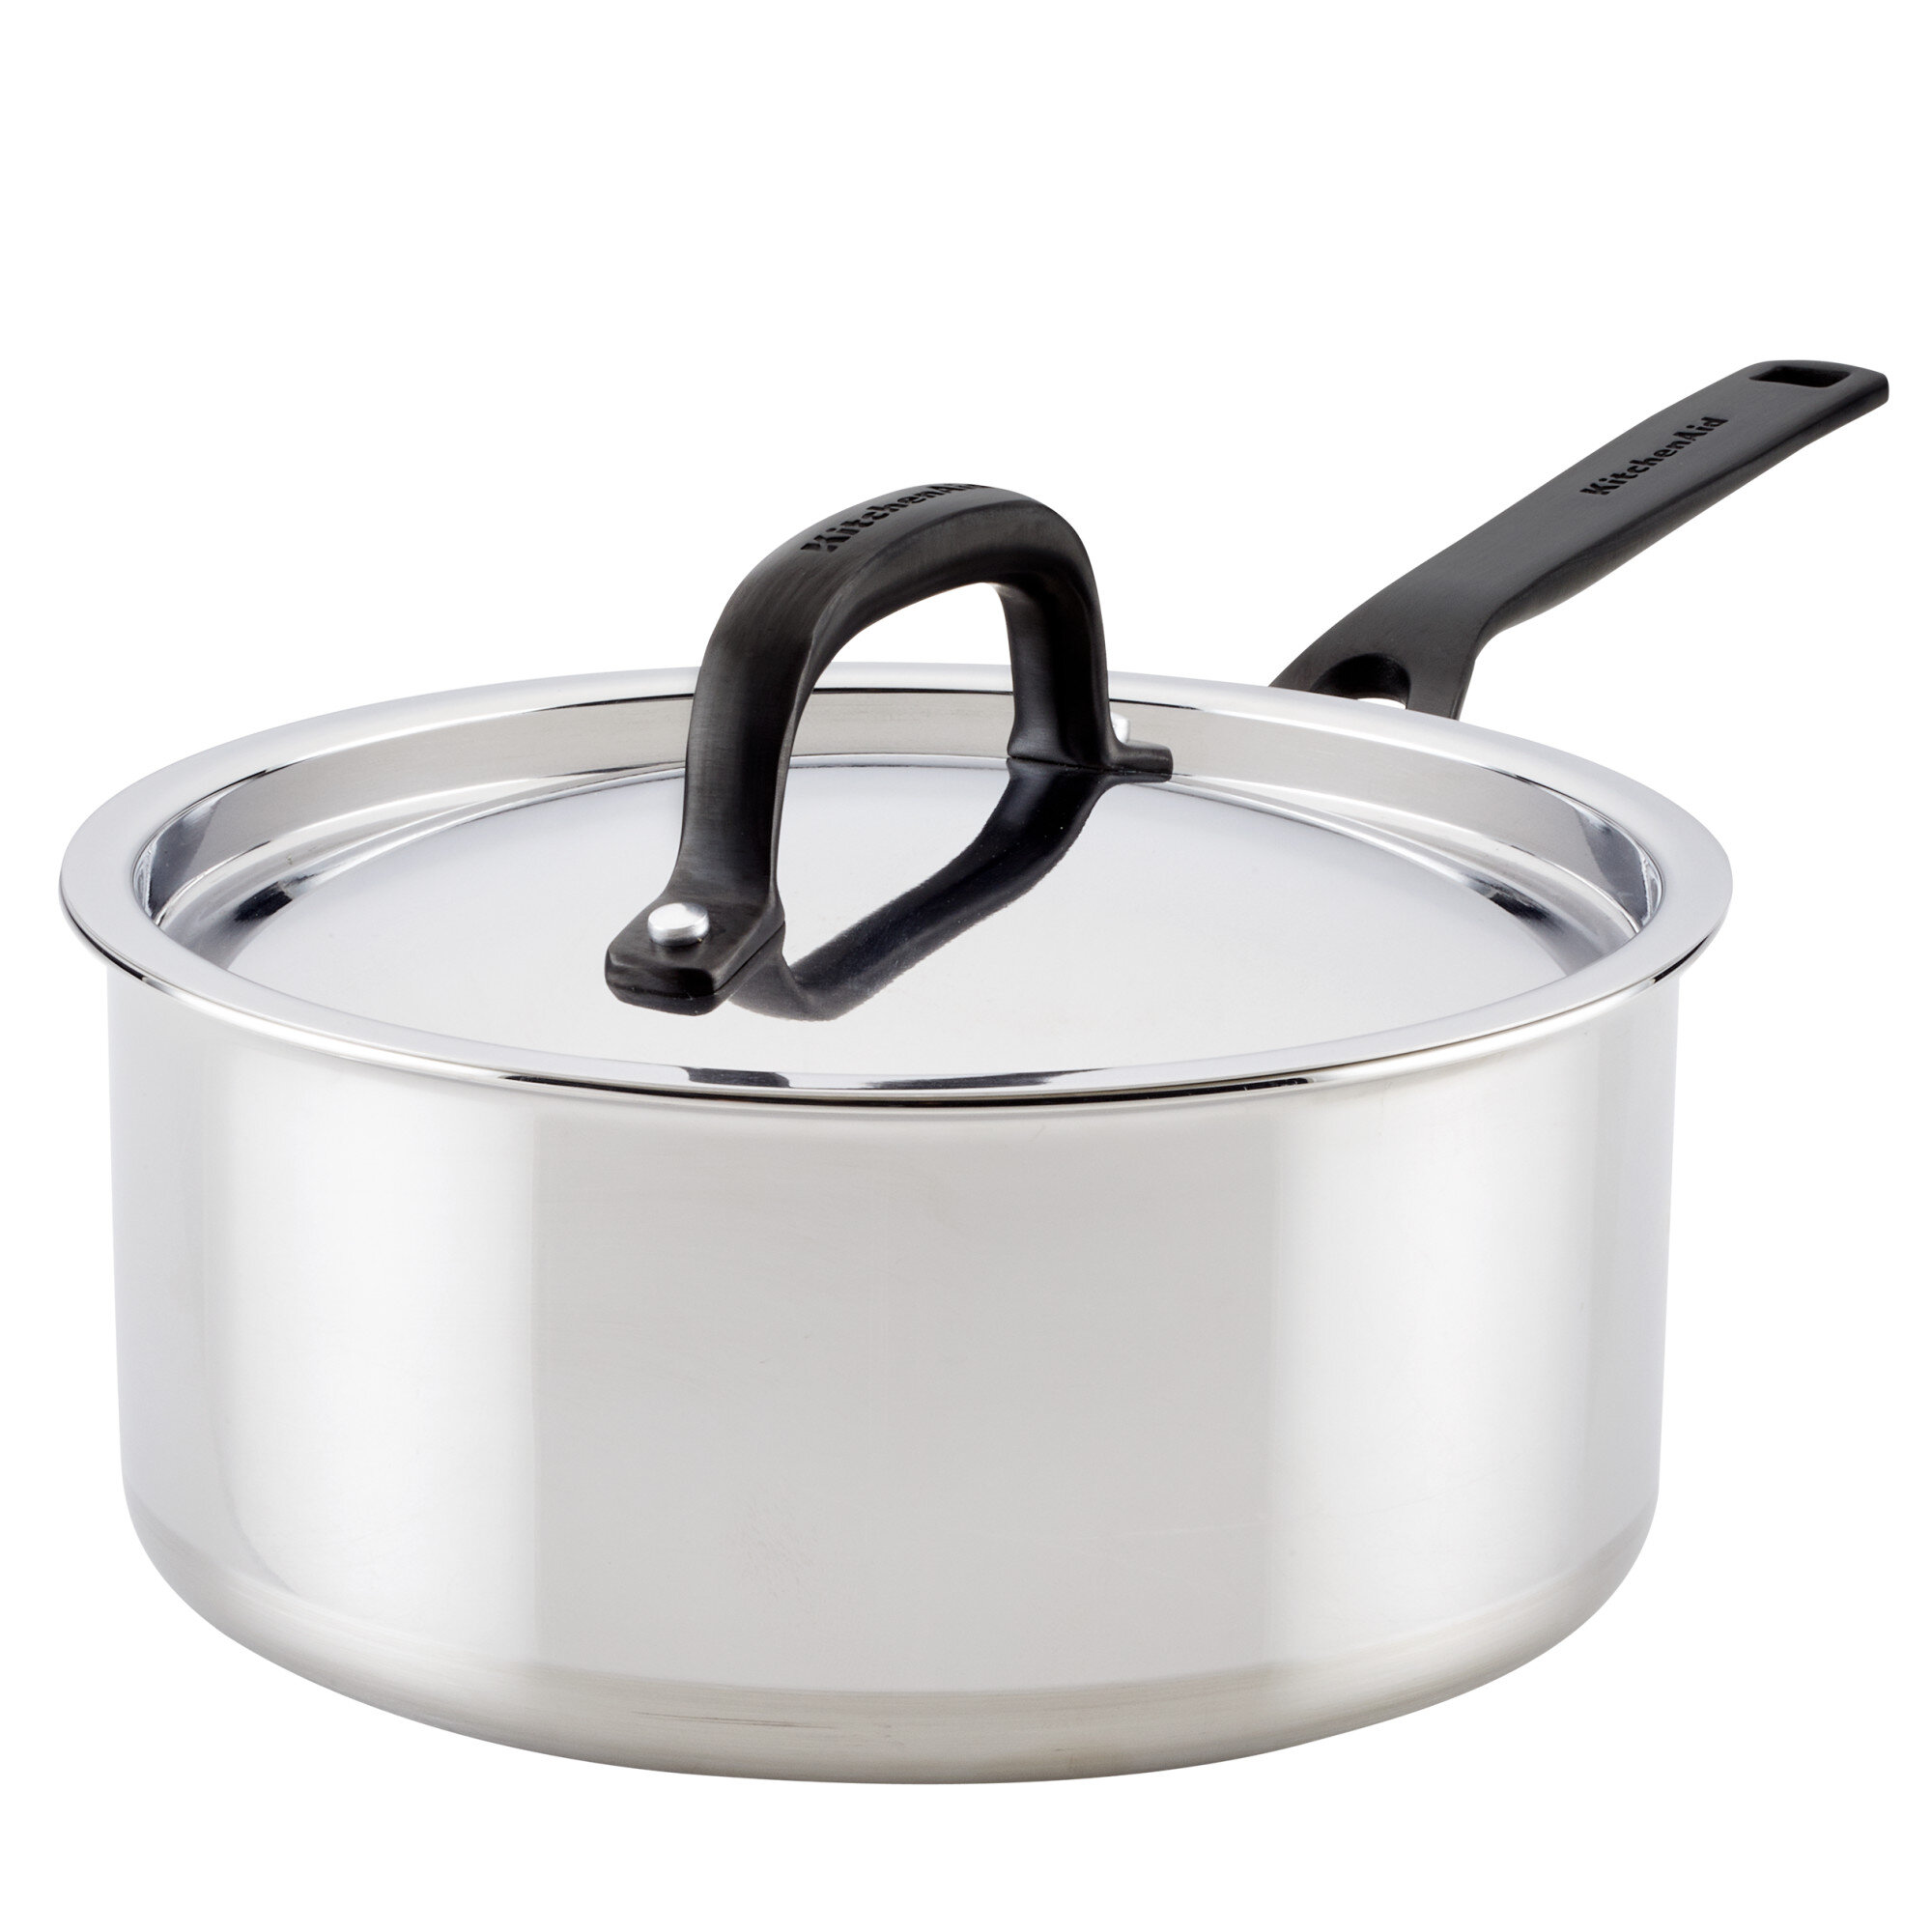 All-Clad D5 5-Ply Stainless Steel Sauce Pan with Lid 3 Quart